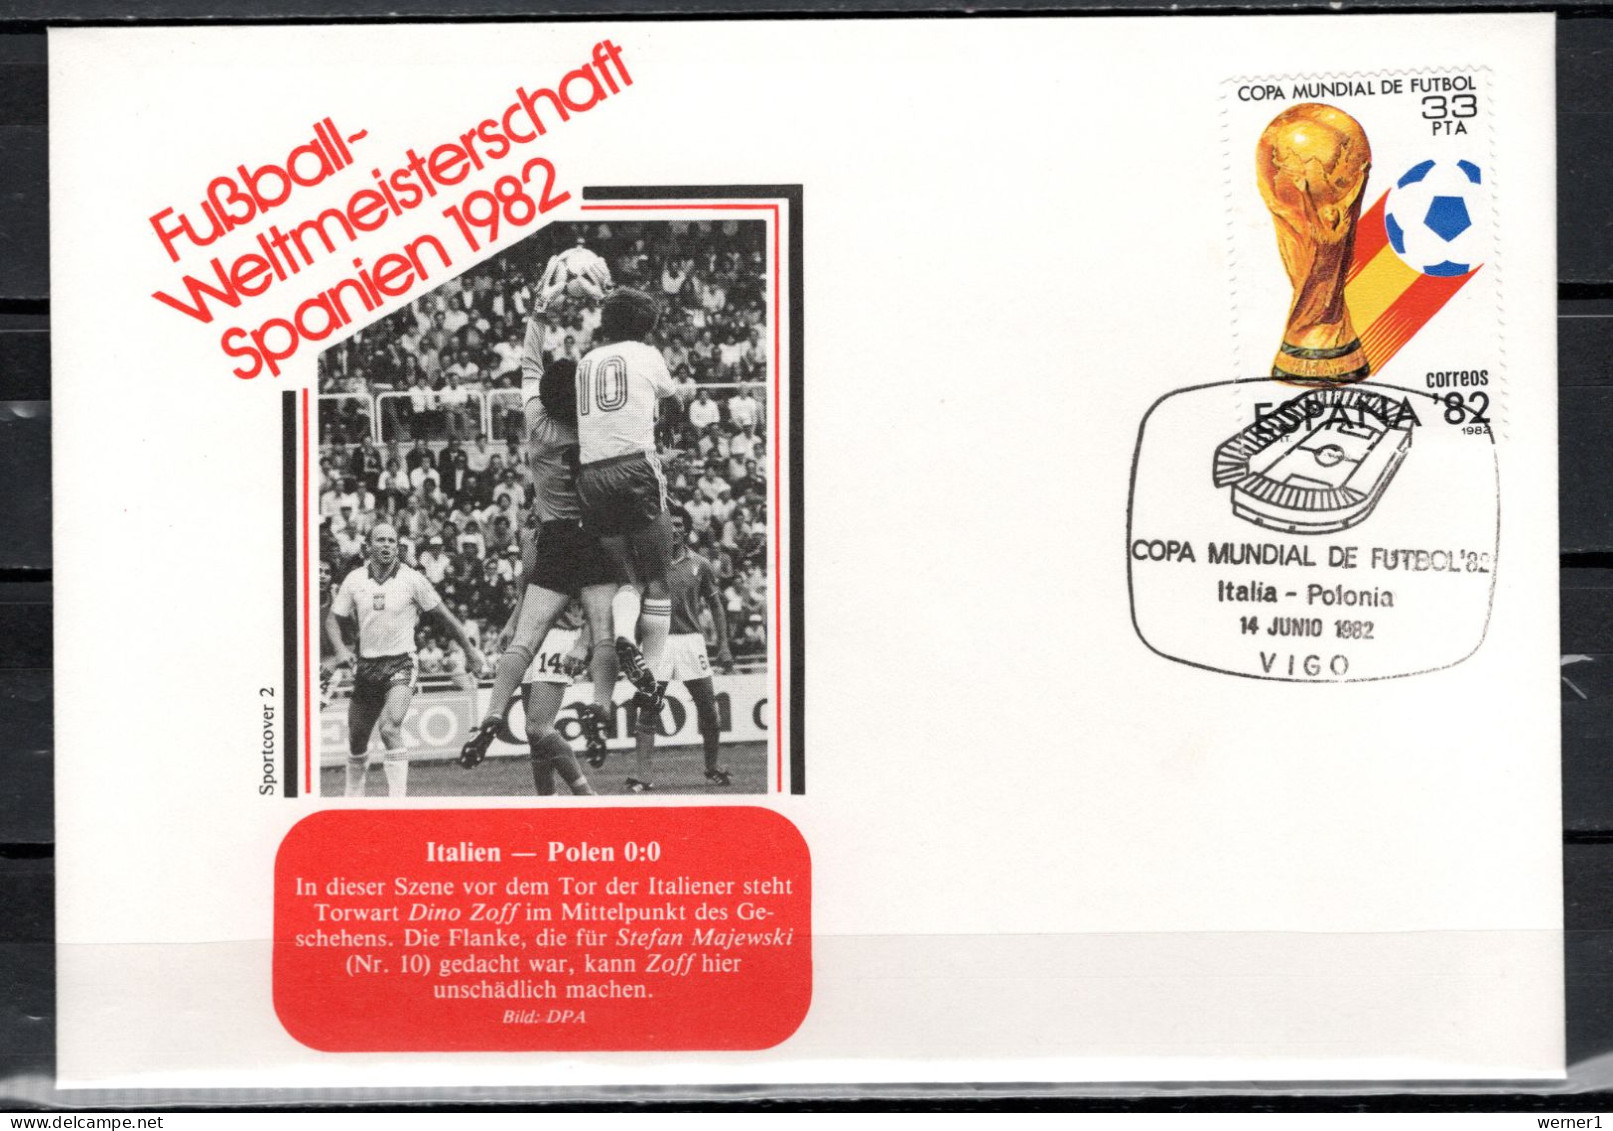 Spain 1982 Football Soccer World Cup Commemorative Cover Match Italy - Poland 0:0 - 1982 – Espagne